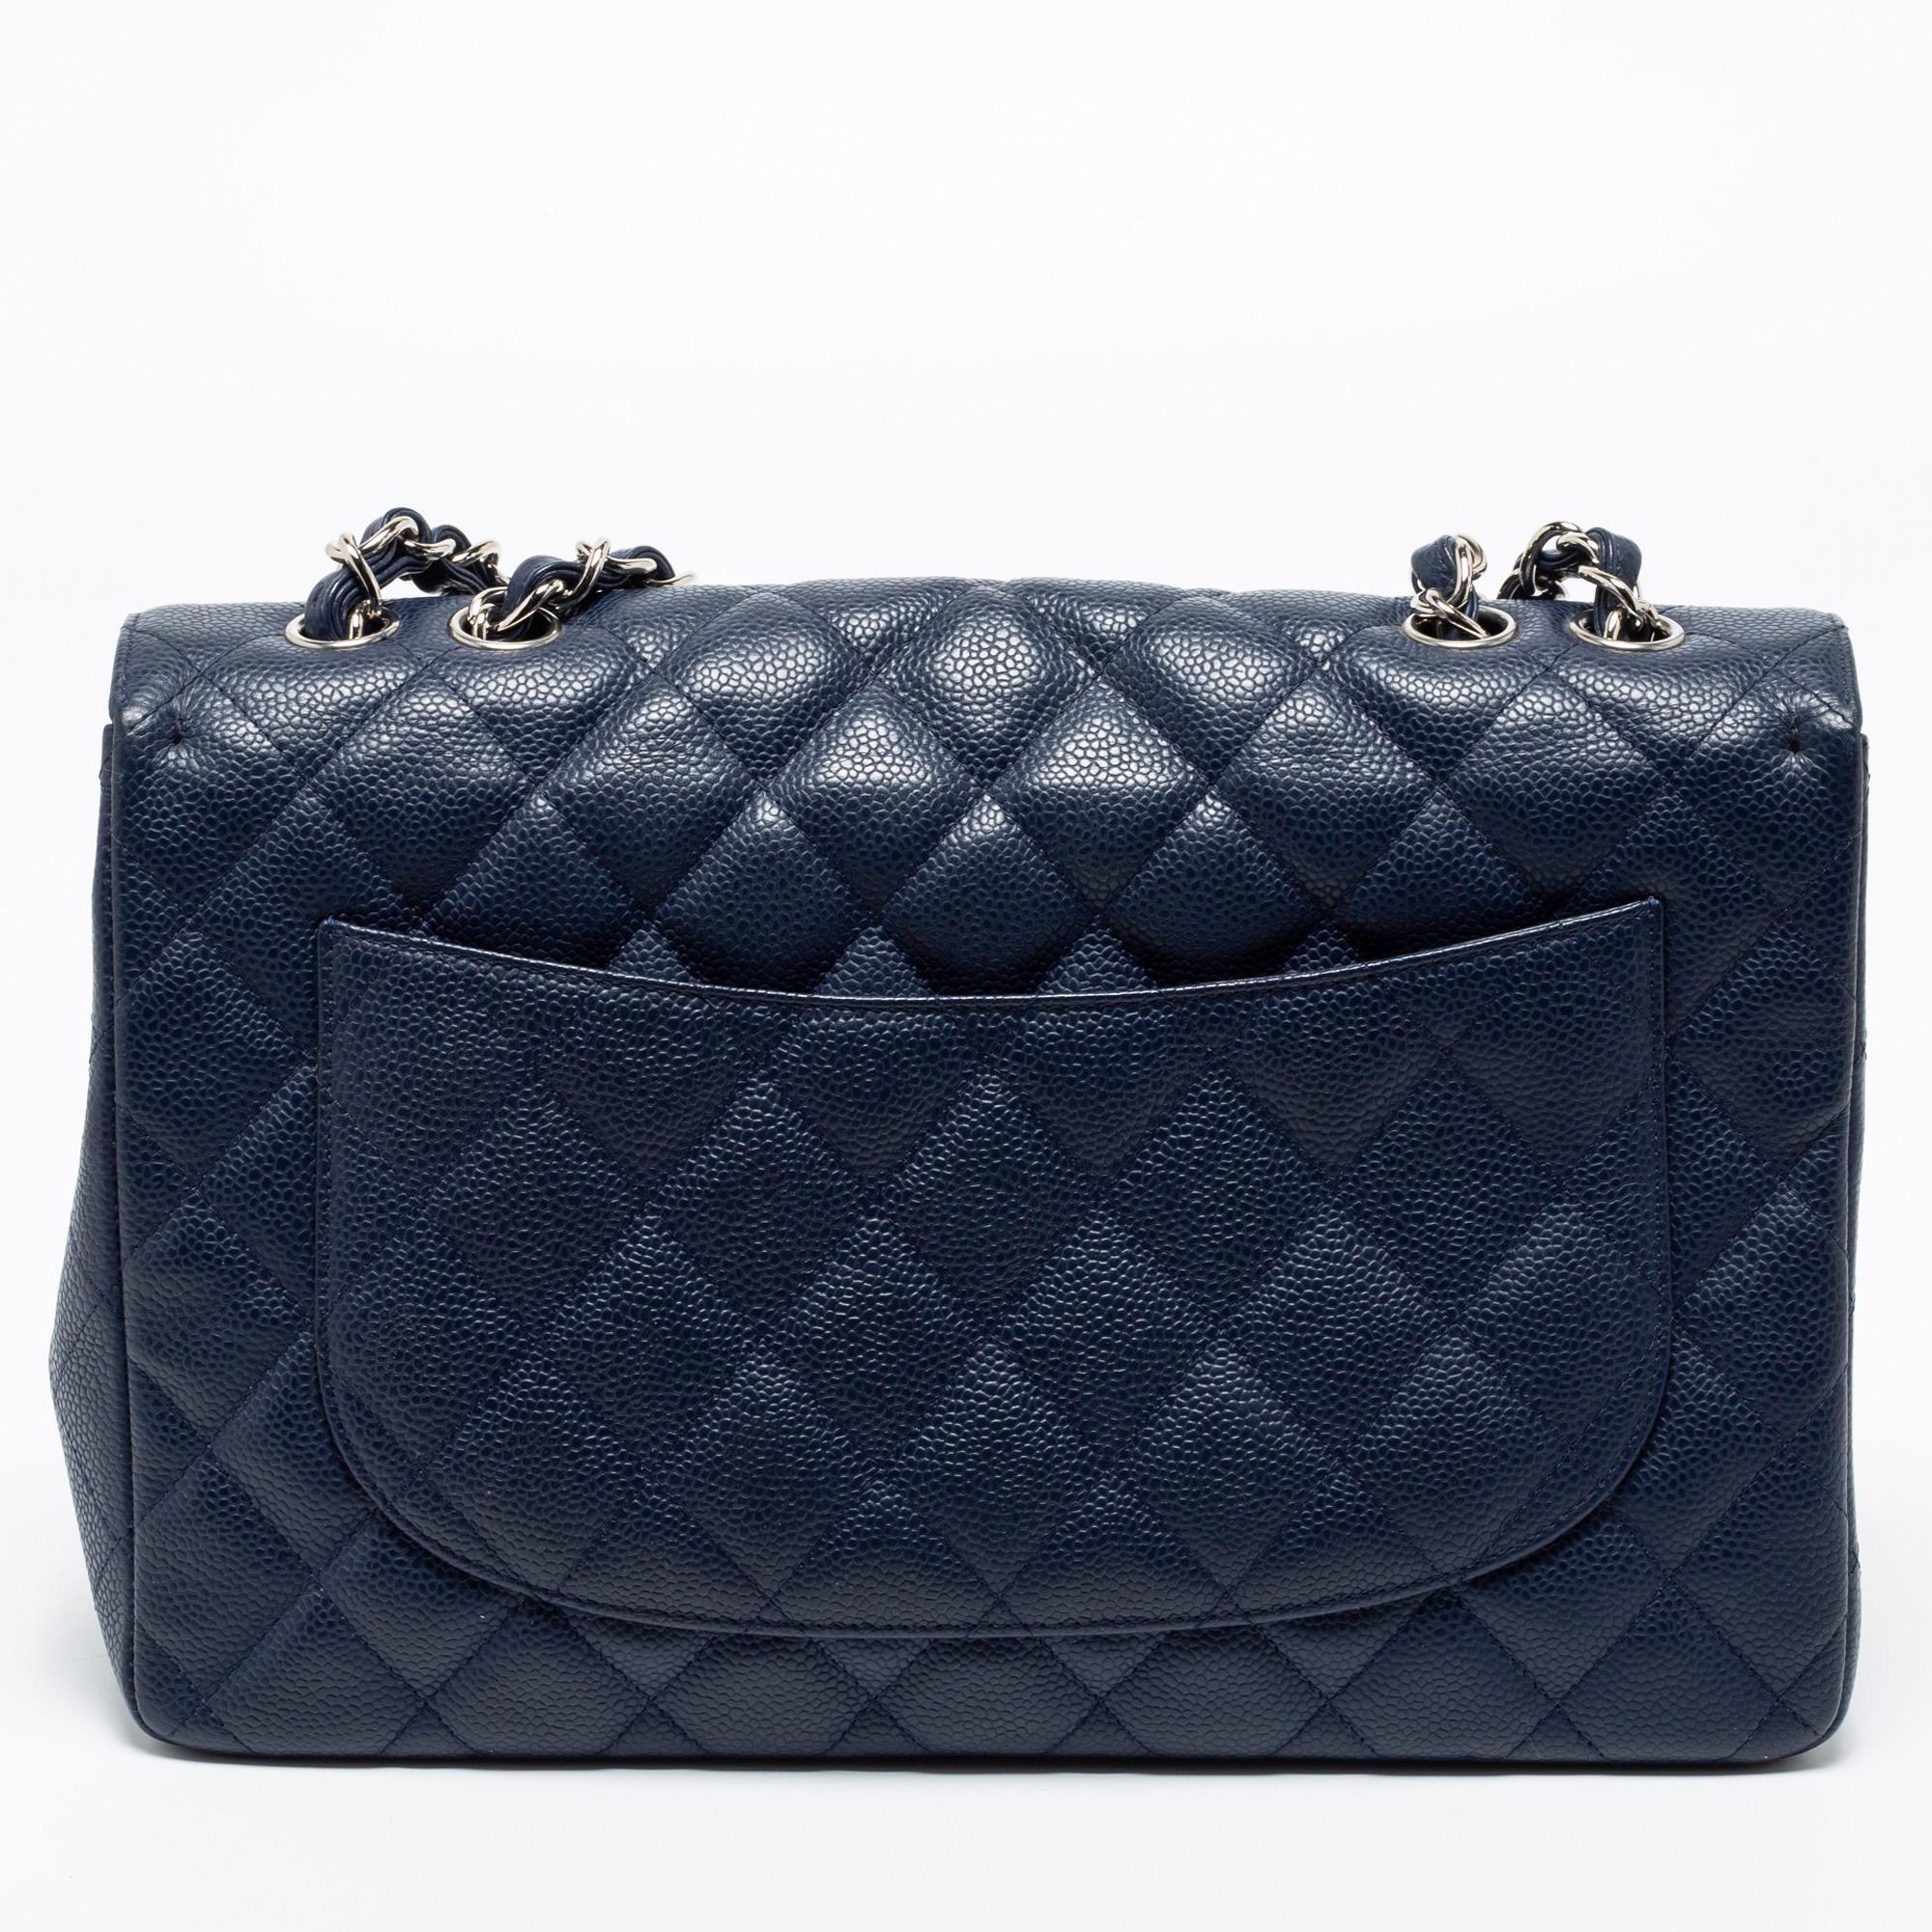 We're bringing Chanel's iconic Classic Flap bag to your closet with this creation. Beautifully crafted from leather and covered in the diamond quilt, it bears the signature label inside the leather interior and the iconic CC turn-lock on the flap.